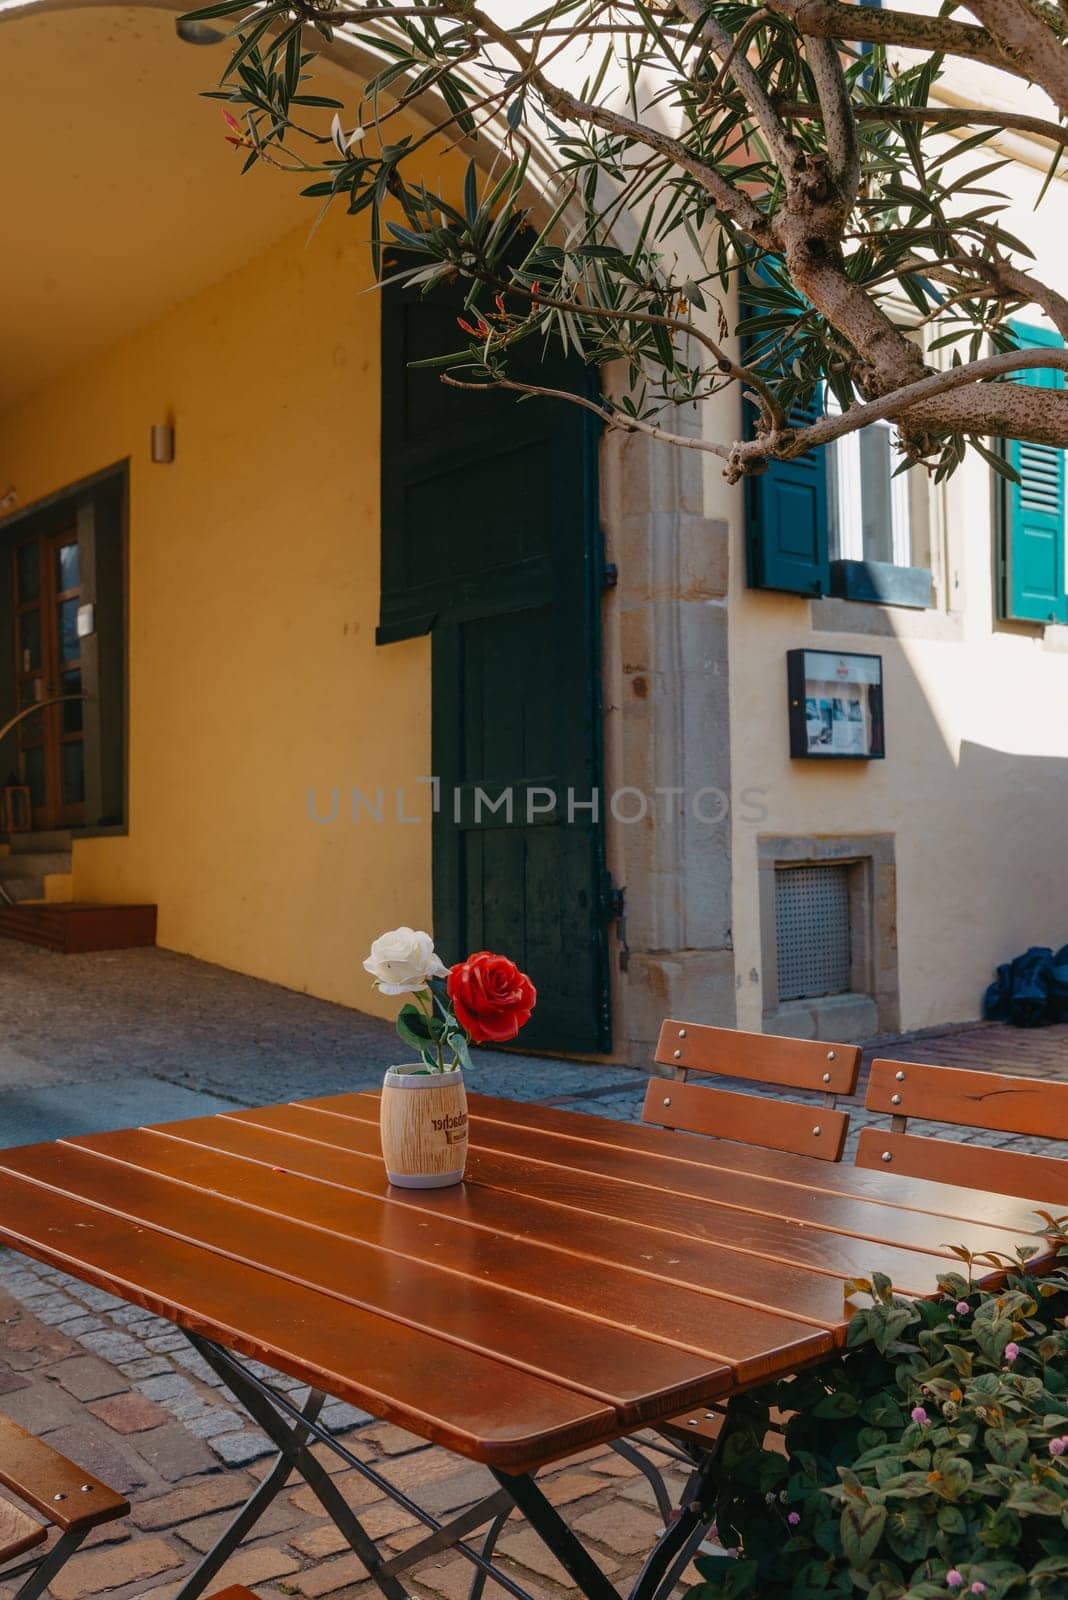 Empty cafe terrace with white table and chair. exterior of the cafe restaurant. interior Street cafe. Cozy street with flowers and French-style cafe table. Decor facade of coffeehouse with bike. Table on a summer terrace with cake and teapot. Garden table and chairs